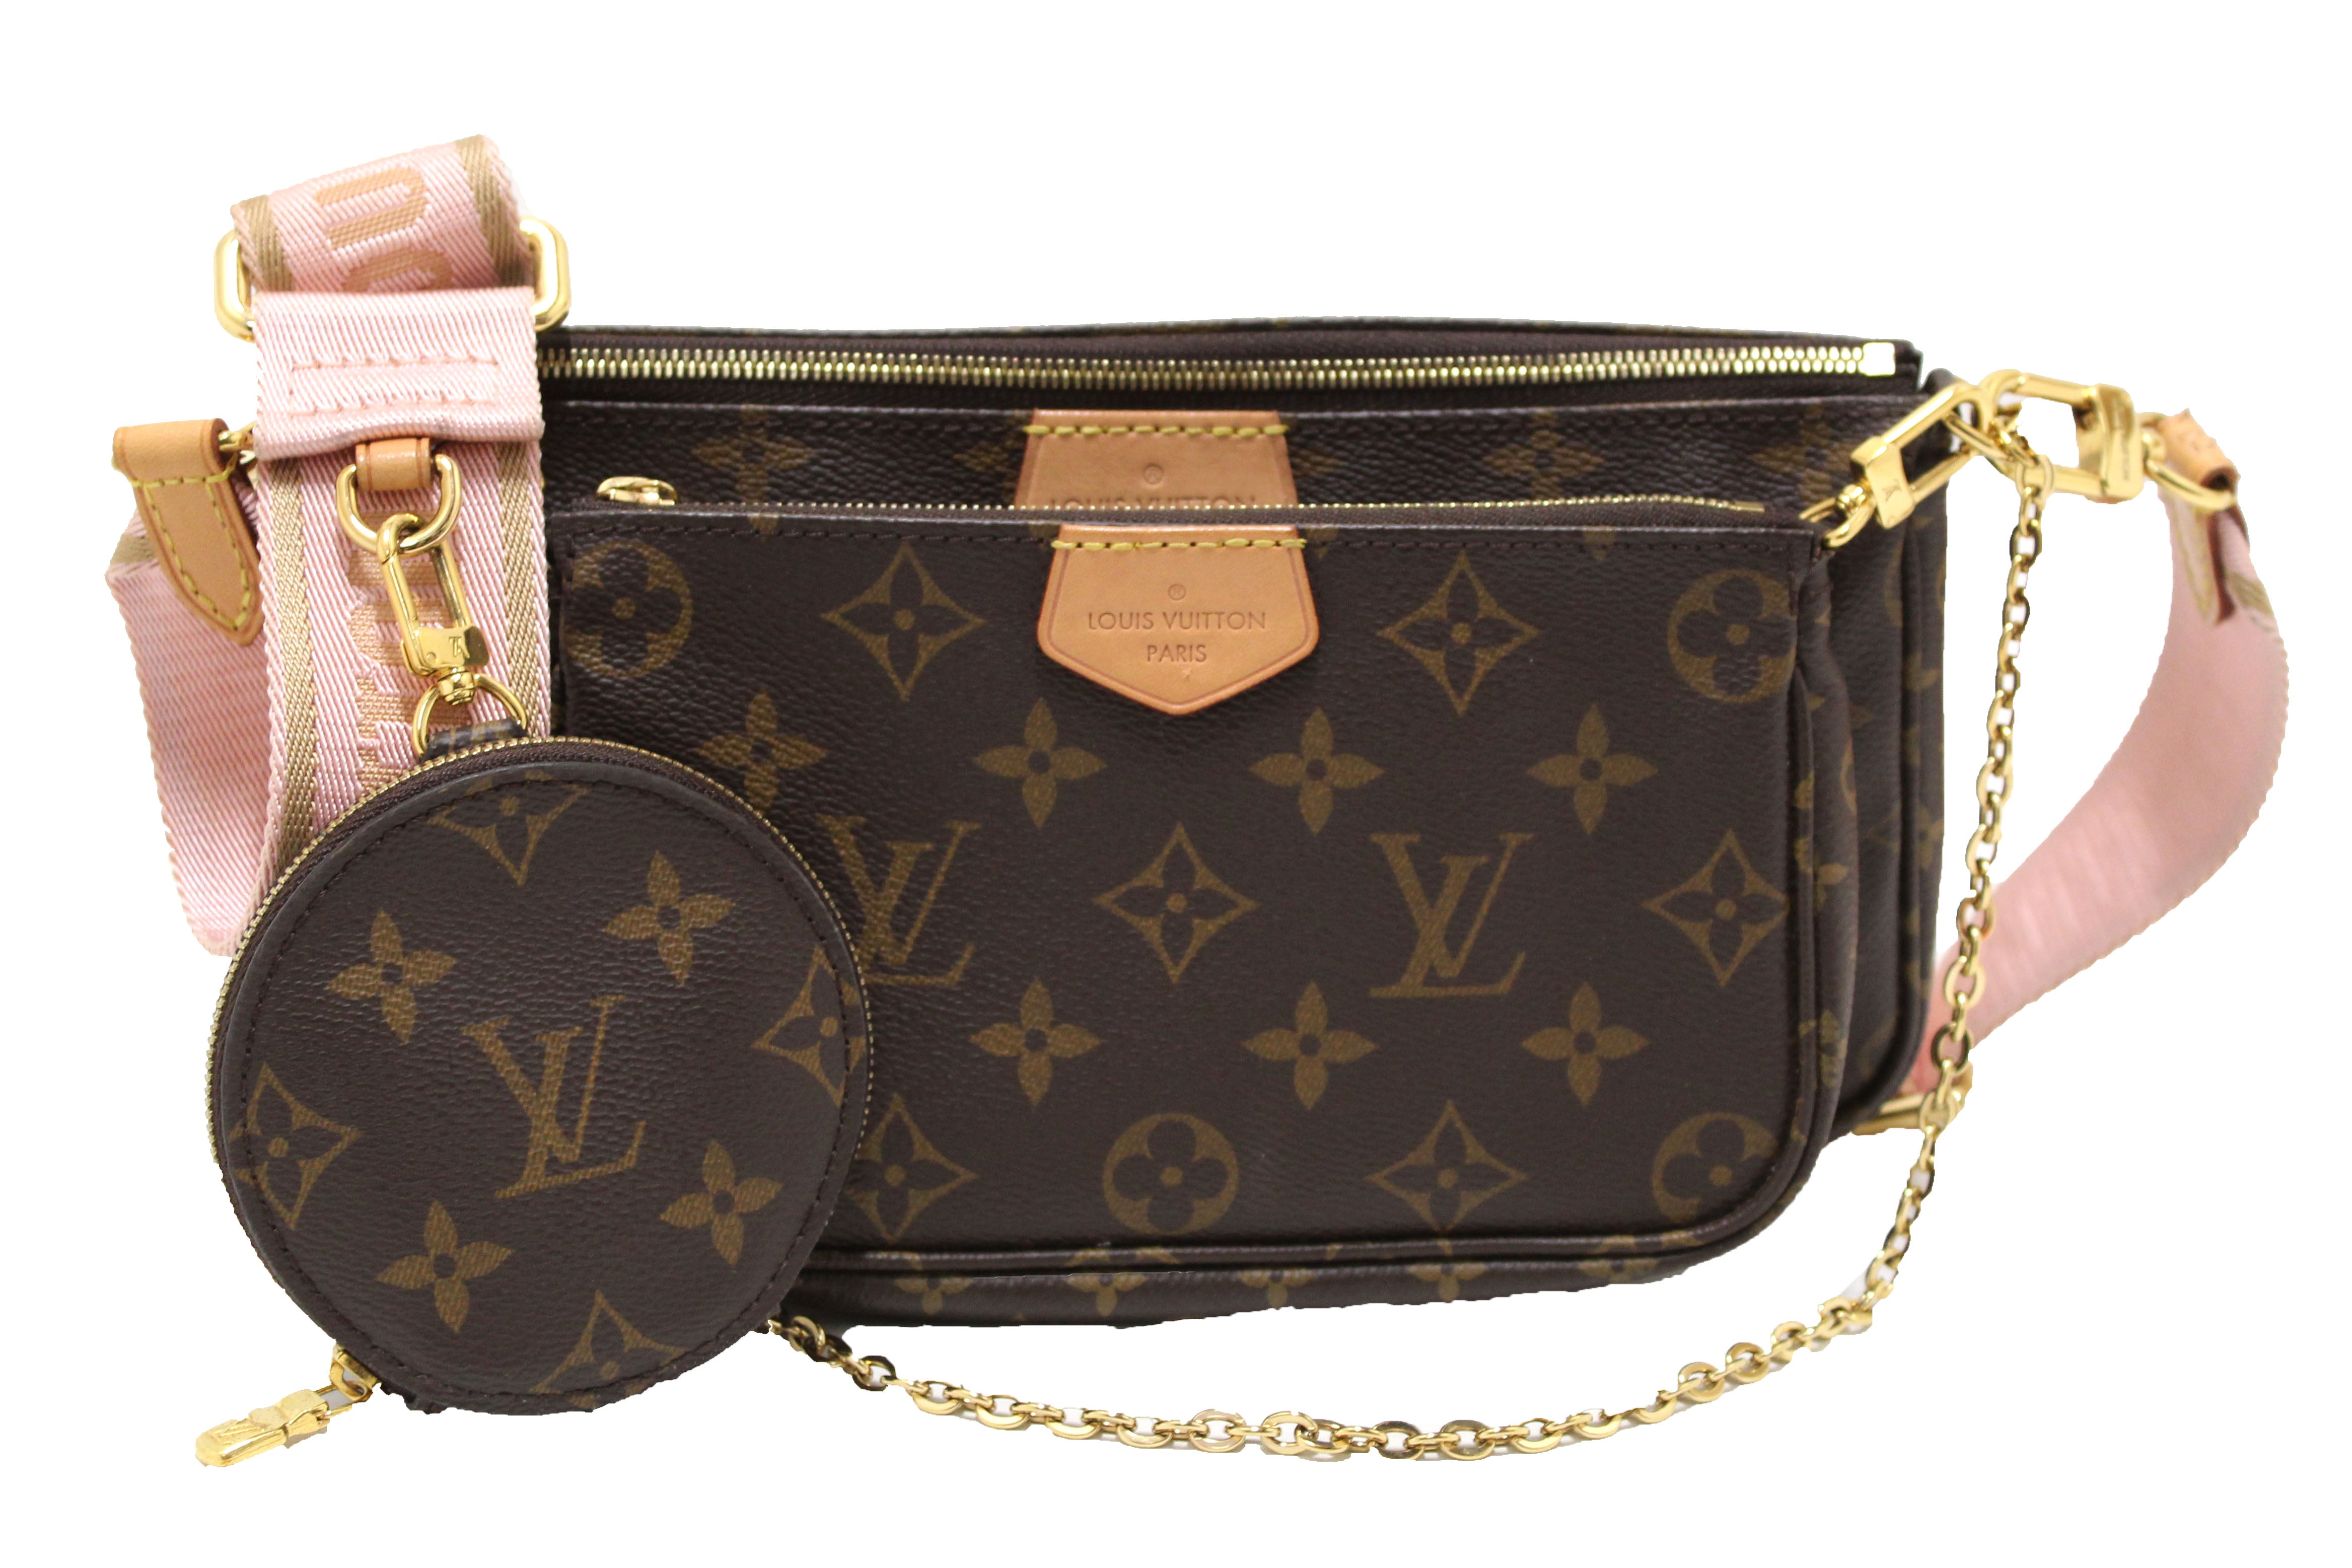 lv purse with pink strap